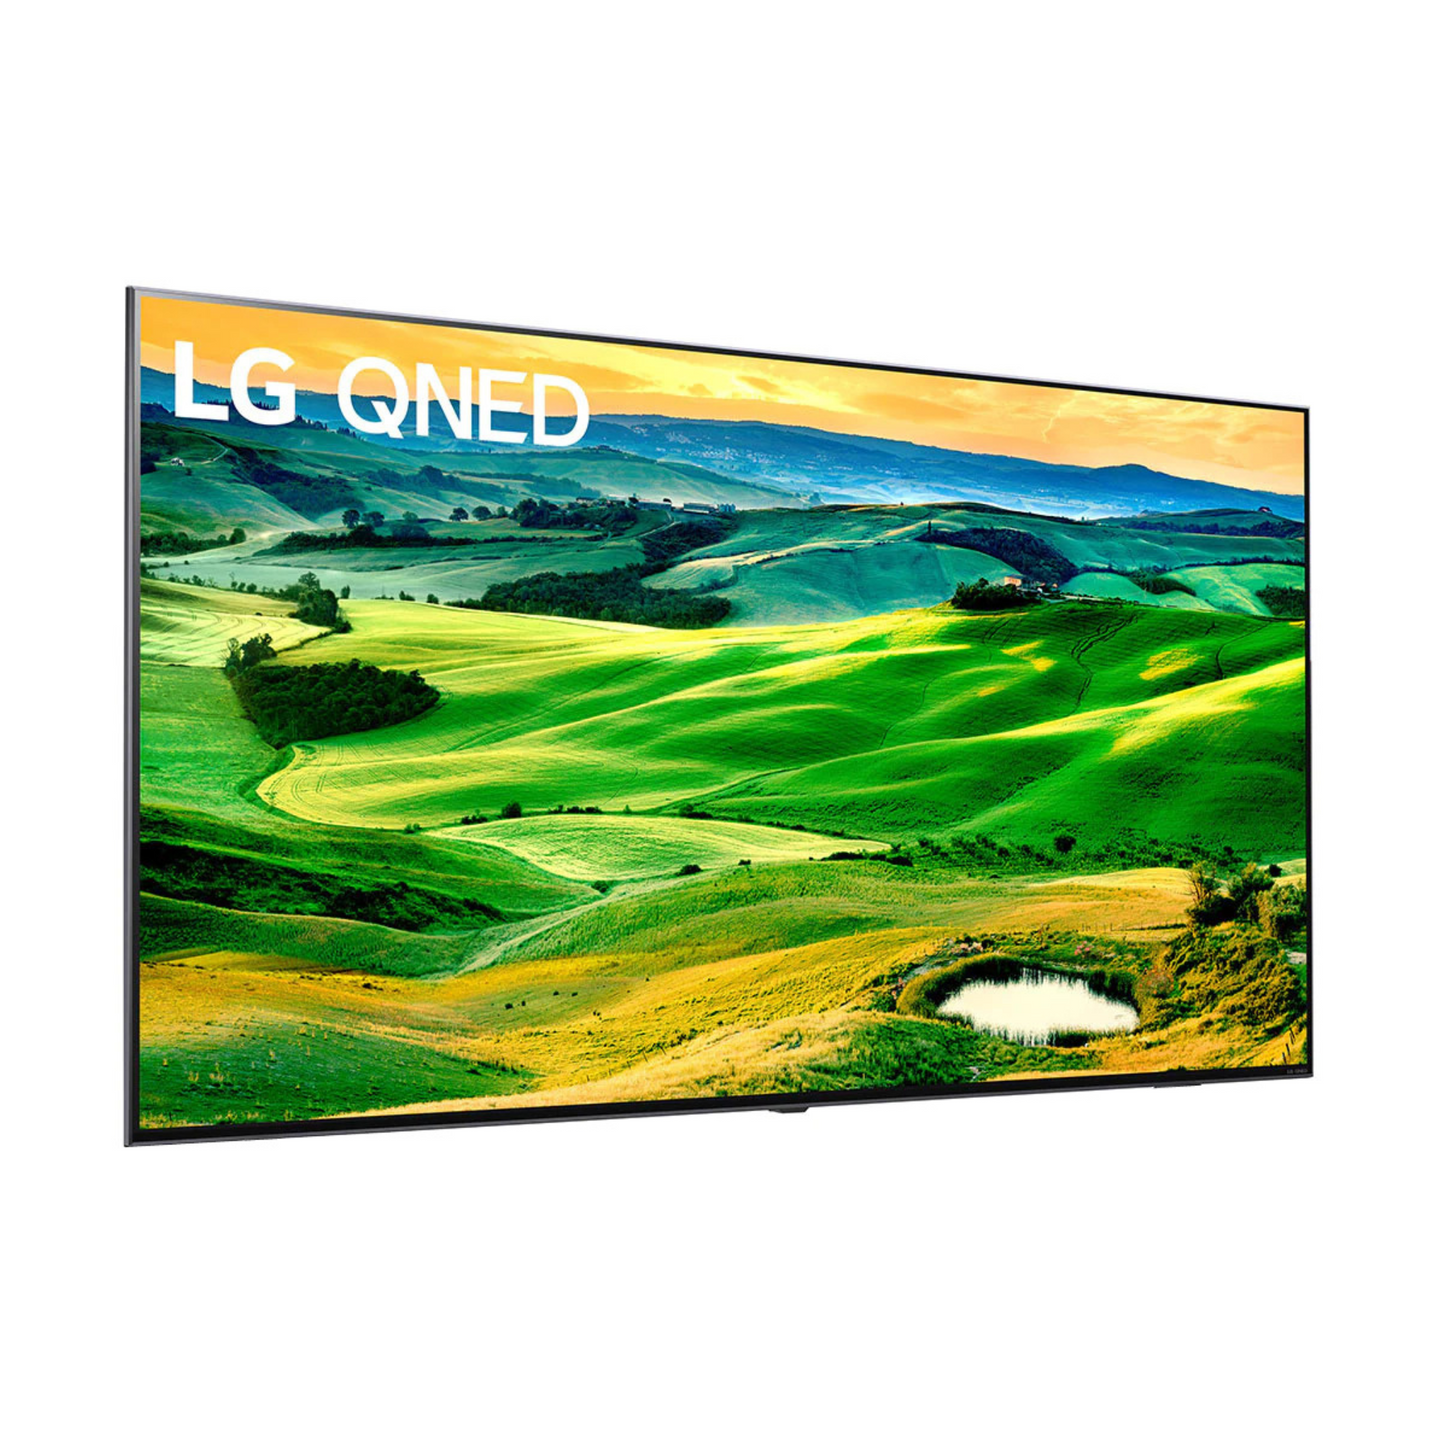 LG 55 inch Smart QNED TV, 55QNED7S